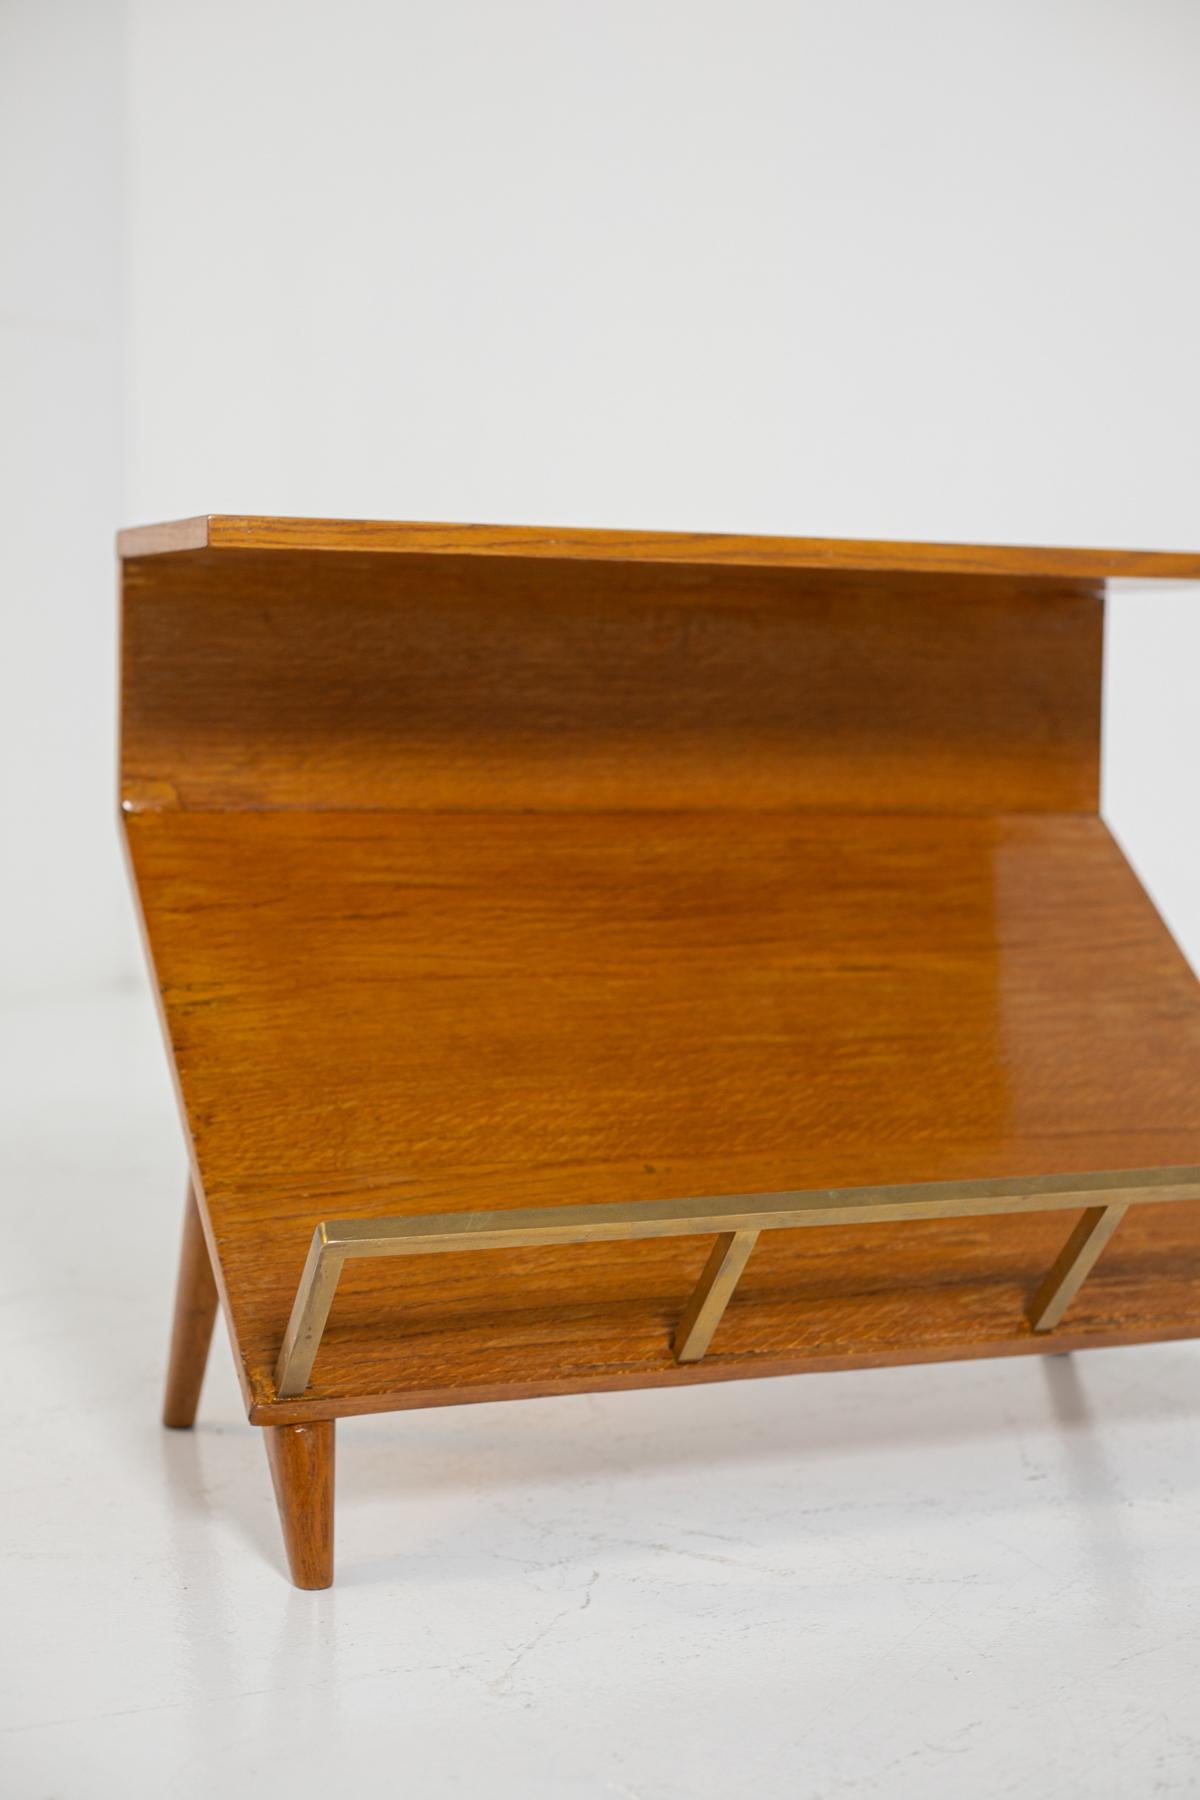 Wood and brass magazine rack by Marco Zanuso, 1950s. The magazine rack has a dual function through its support surface, in fact it can also serve as a small table placed next to a sofa. The magazine rack is made of wood with angles and sharp